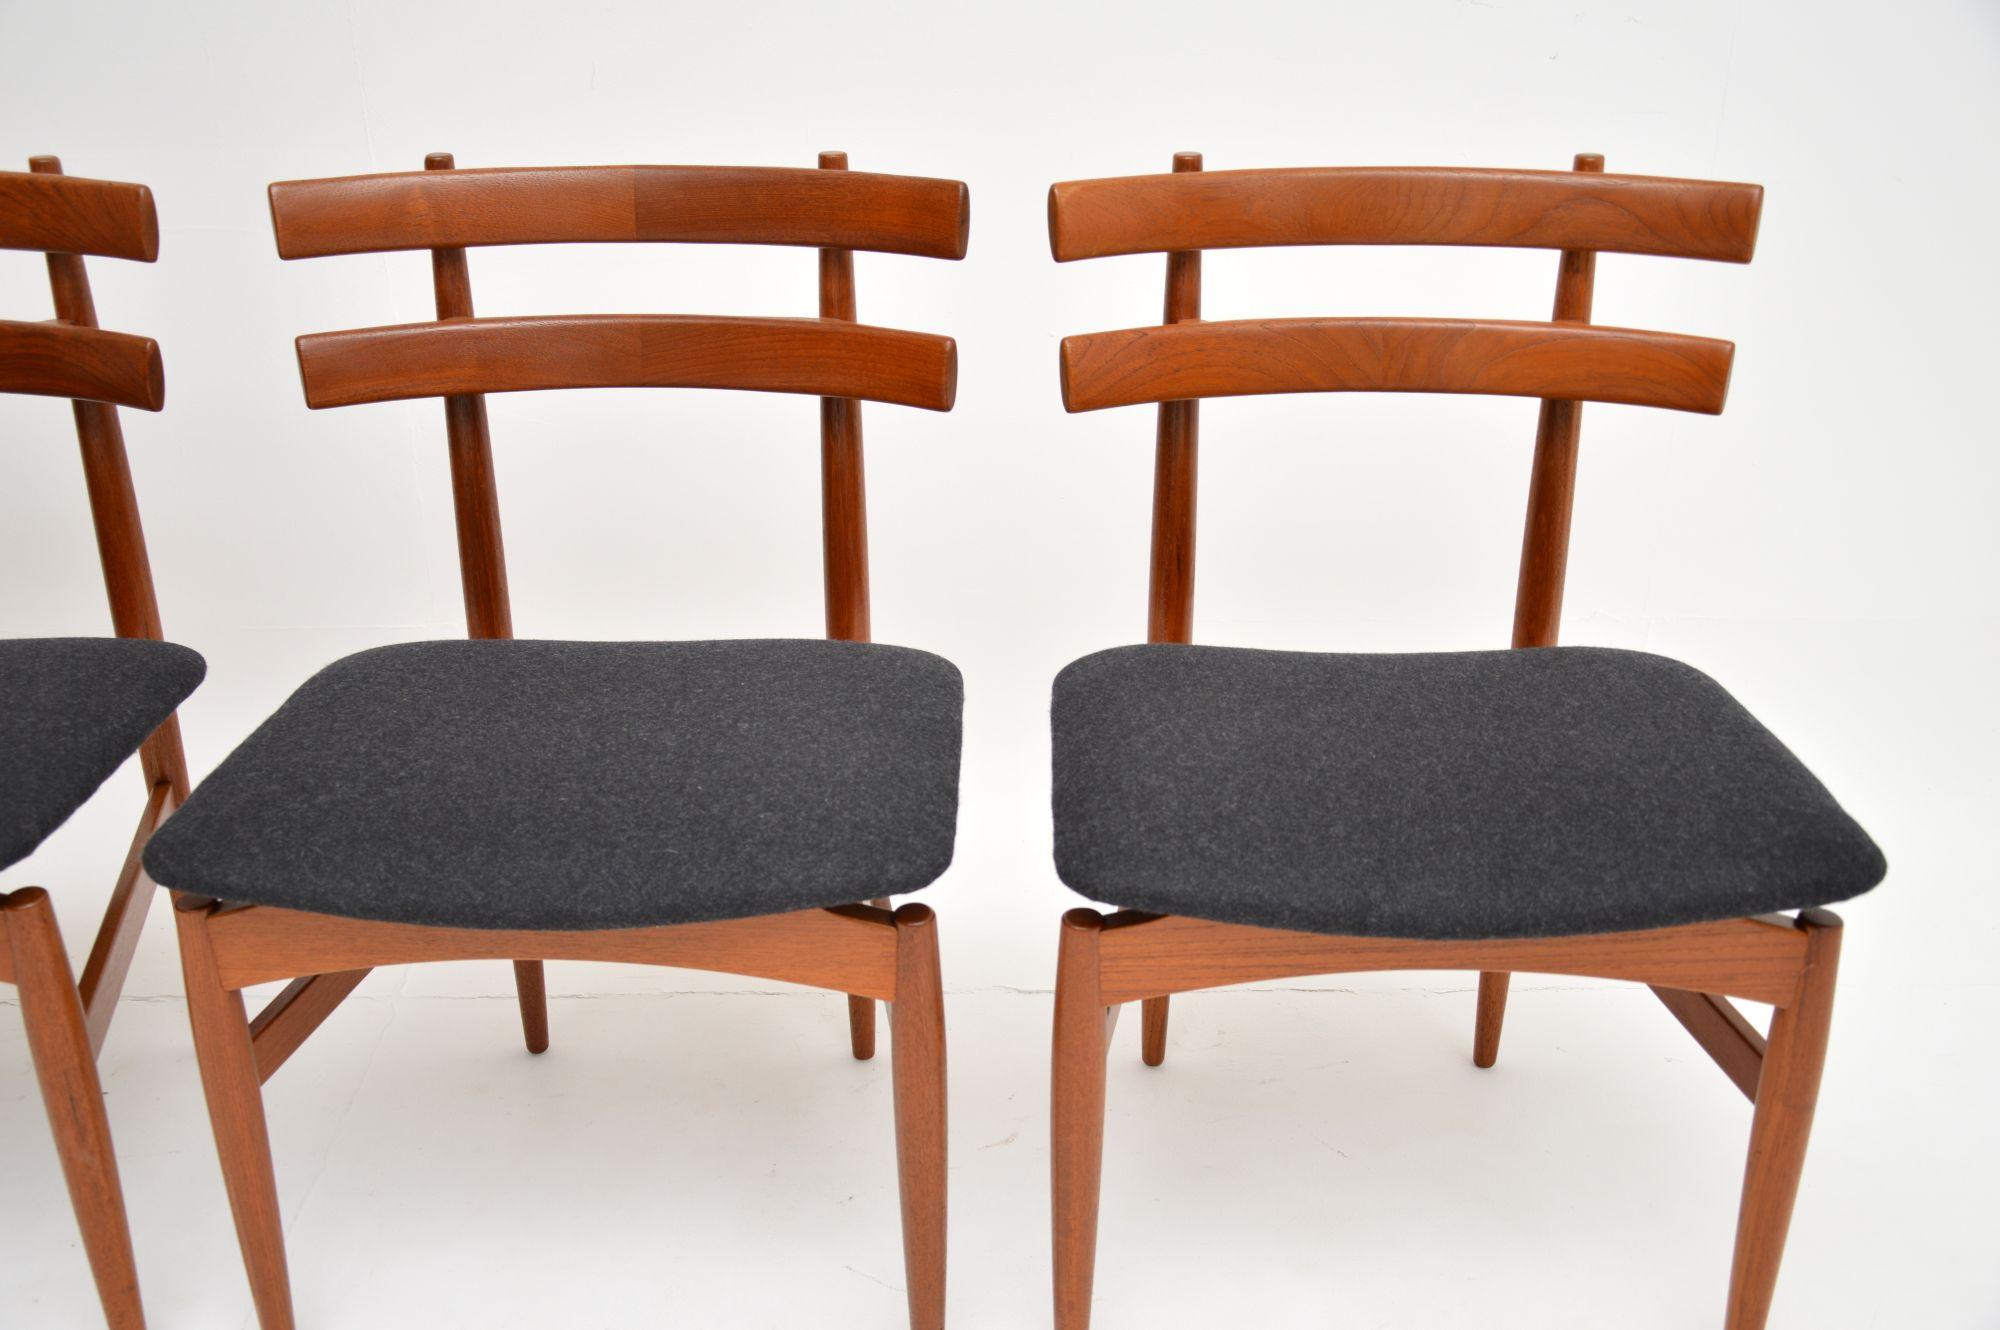 Set of 4 Danish Vintage Teak Dining Chairs by Poul Hundevad In Good Condition For Sale In London, GB